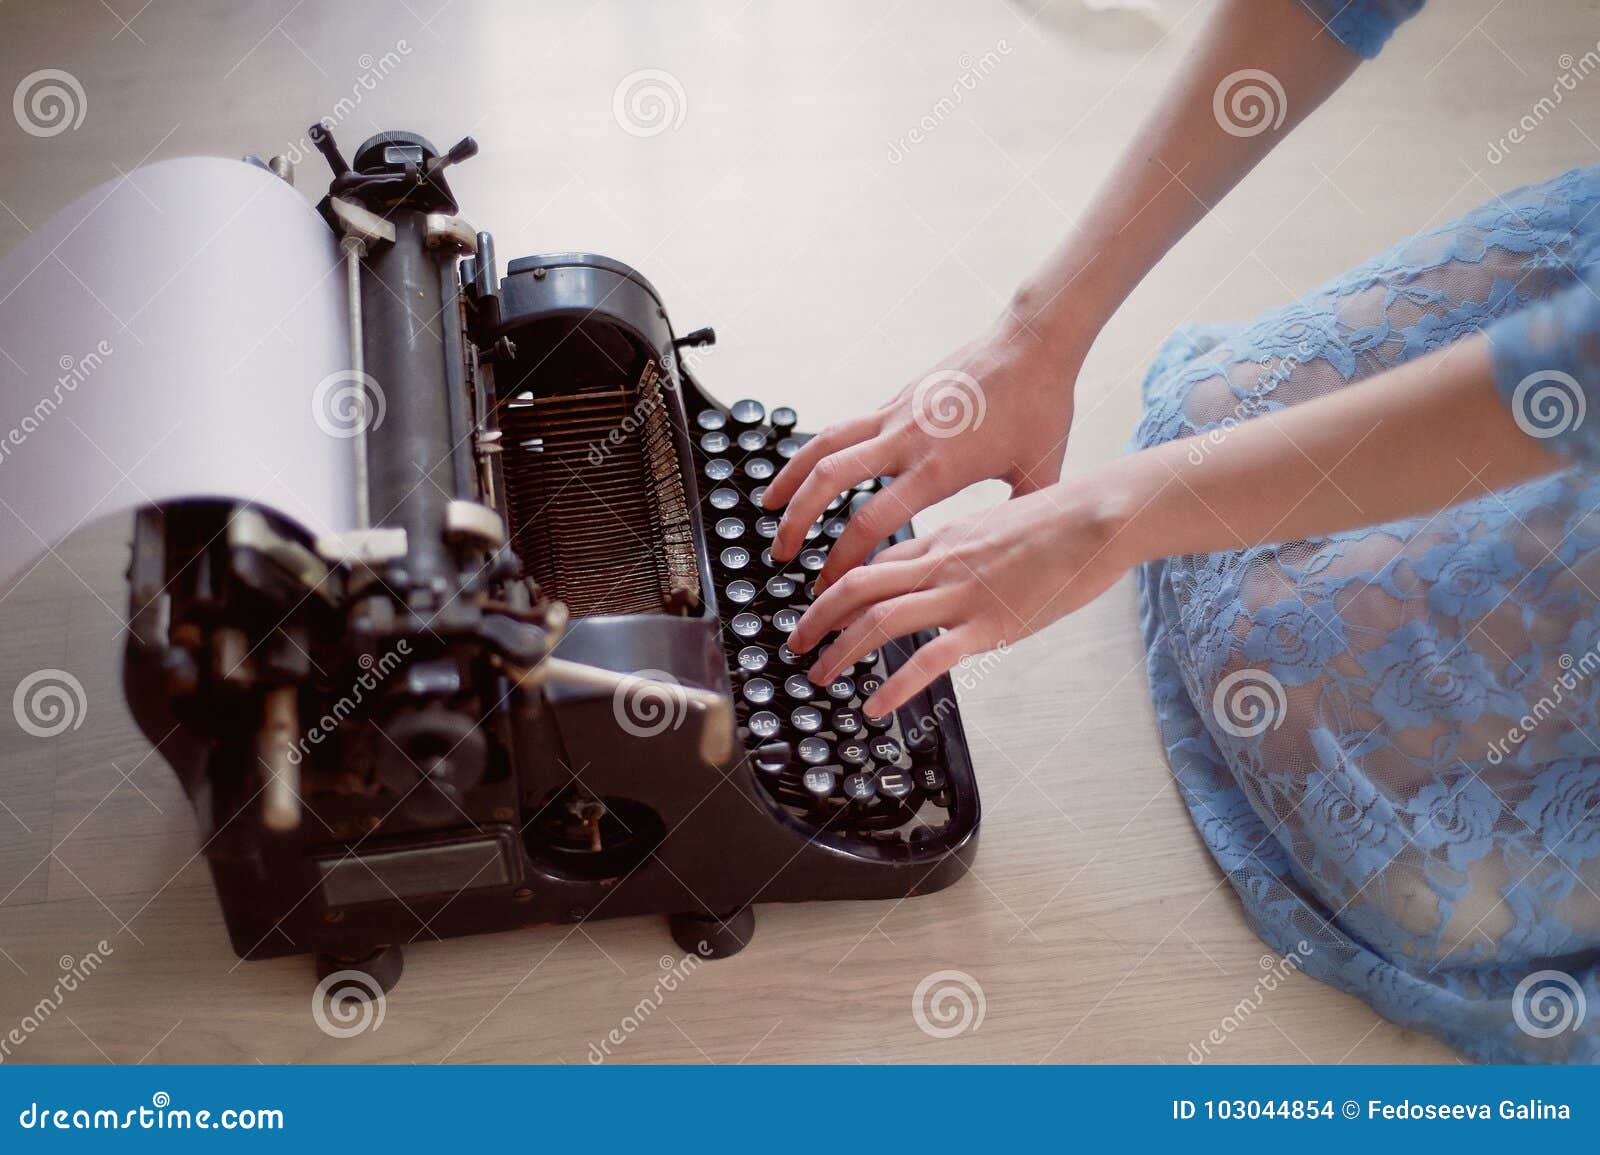 a creative person, author of books, writer of bestsellers,a journalist typing on an old typewriter. inspiration in the